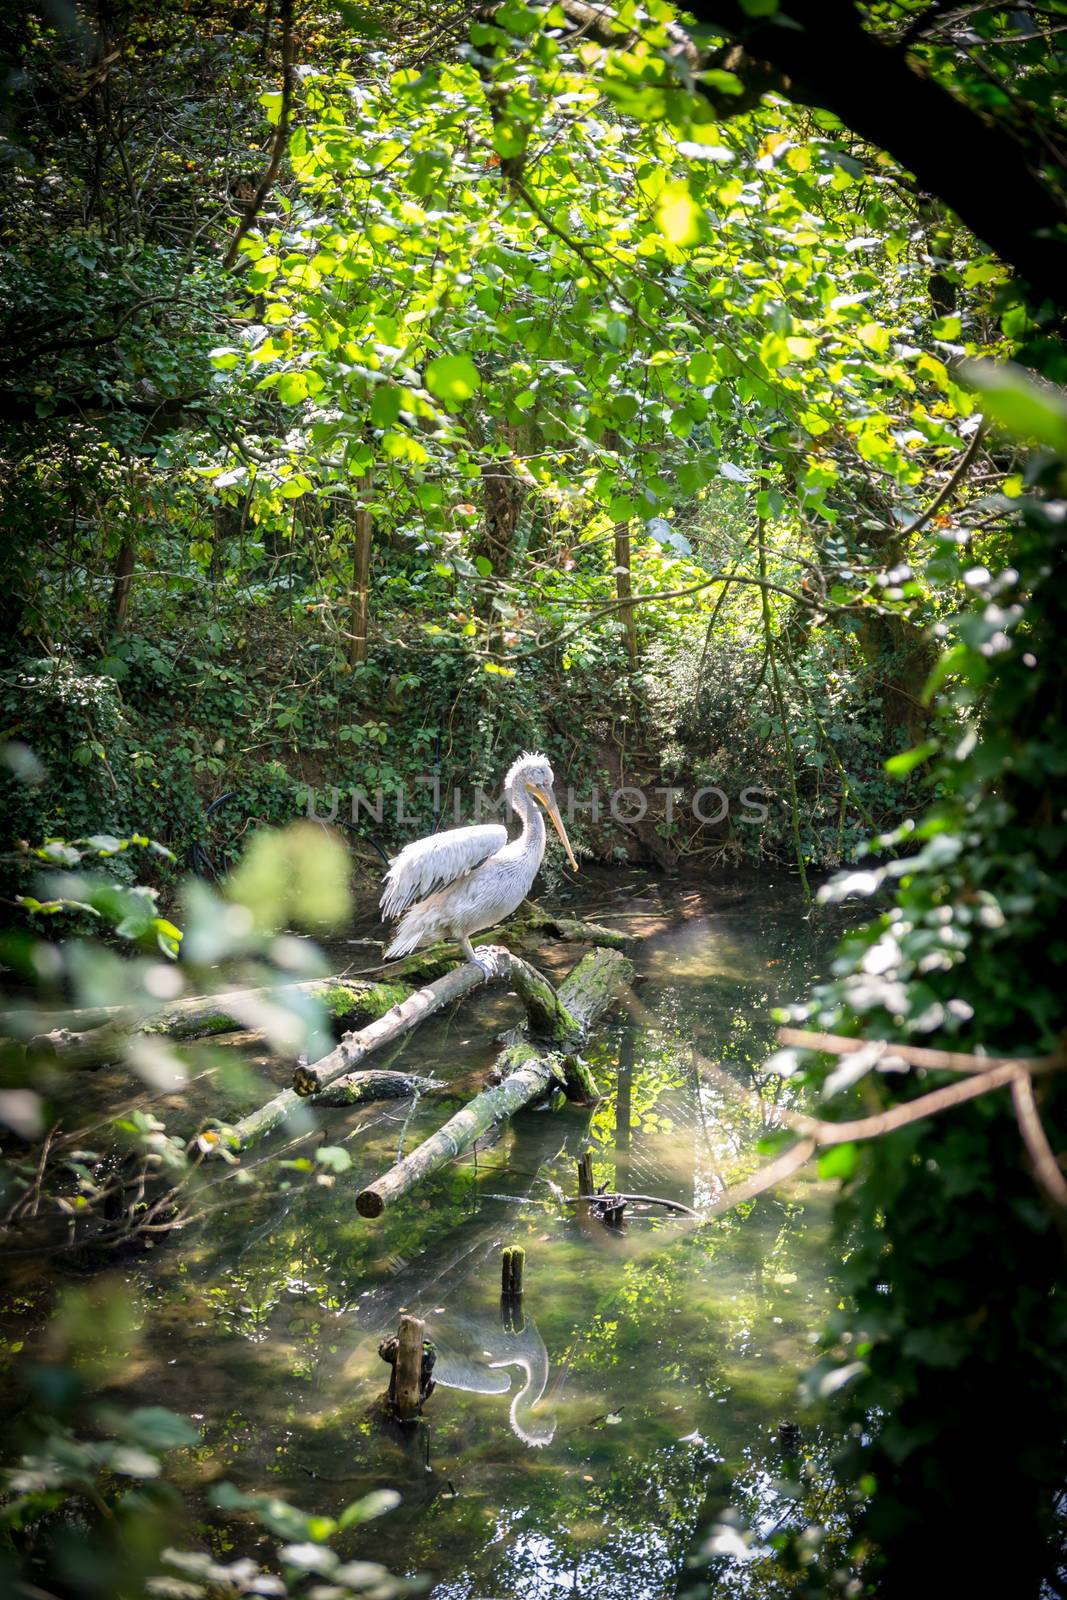 White Heron in a stream in the forest. by Isaac74